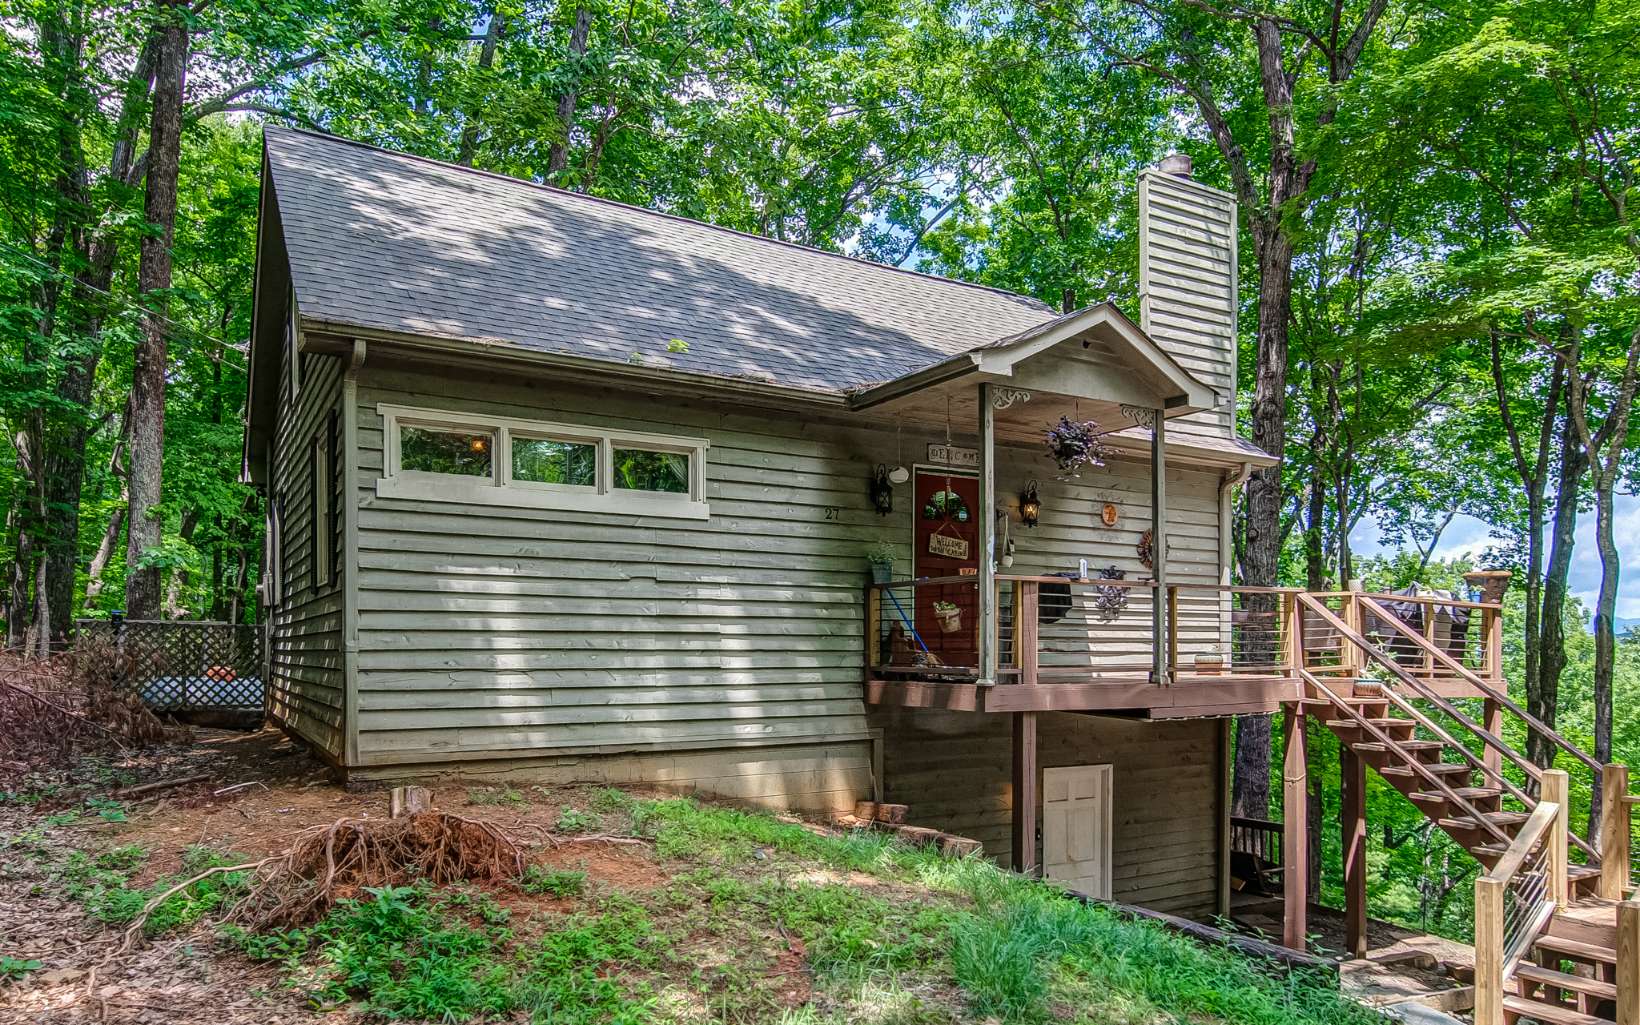 You do NOT want to miss this opportunity! Beautiful cabin in the highly sought after Walnut Mountain community of Ellijay, GA is now available. MILLION DOLLAR views of the North Georgia mountains. Be prepared to have your breath taken away! This home is ready for you to come in and make it your own. Sizable double lot, means you never have to worry about losing the serenity and peace this home has offer. Easy access to the front of the neighborhood, offers a quick escape to the neighborhood's numerous amenities. Extra long driveway and expansive parking pad provides plenty of parking capabilities and an opportunity to host dozens! Newly updated porch is decorated with stylish and chic rebar, well on its way to being the most stylish home in the neighborhood and an envy of all the neighbors. Stunning porch flawlessly wraps around, where you will find the long range mountain views you’ve been looking for! The additional lot being sold, means your view will never be obstructed. Open floor plan living space is adorned with vaulted cathedral ceilings and extra large windows, letting in all of the natural light you could ever want! LVP flow seamlessly throughout the home, both durable and stylish. Farmhouse finishes have been sprinkled throughout the home, including stunning light fixtures, barn doors, and so much more! Country kitchen overlooks the living space. Kitchen is complete with solid wood cabinets, ready to be sanded and made your own! And stainless steel appliances fini